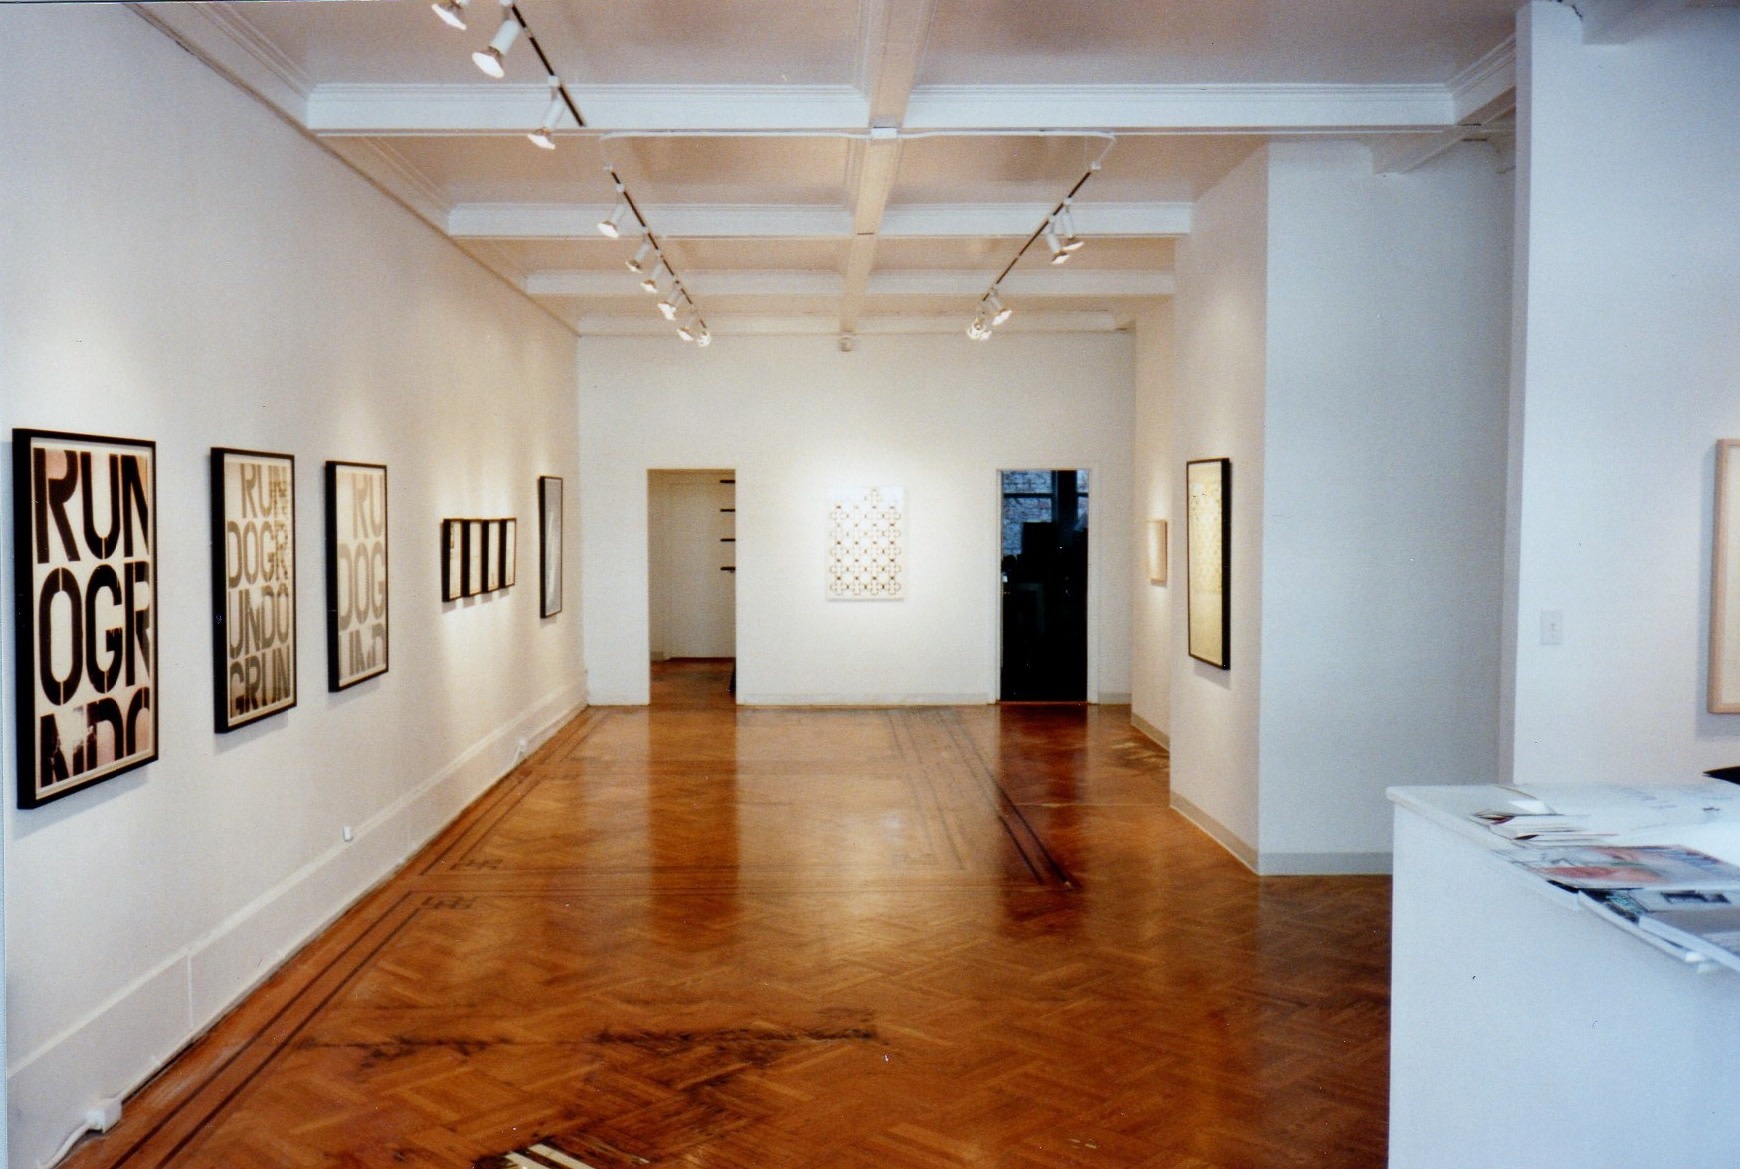 Install of various works on paper